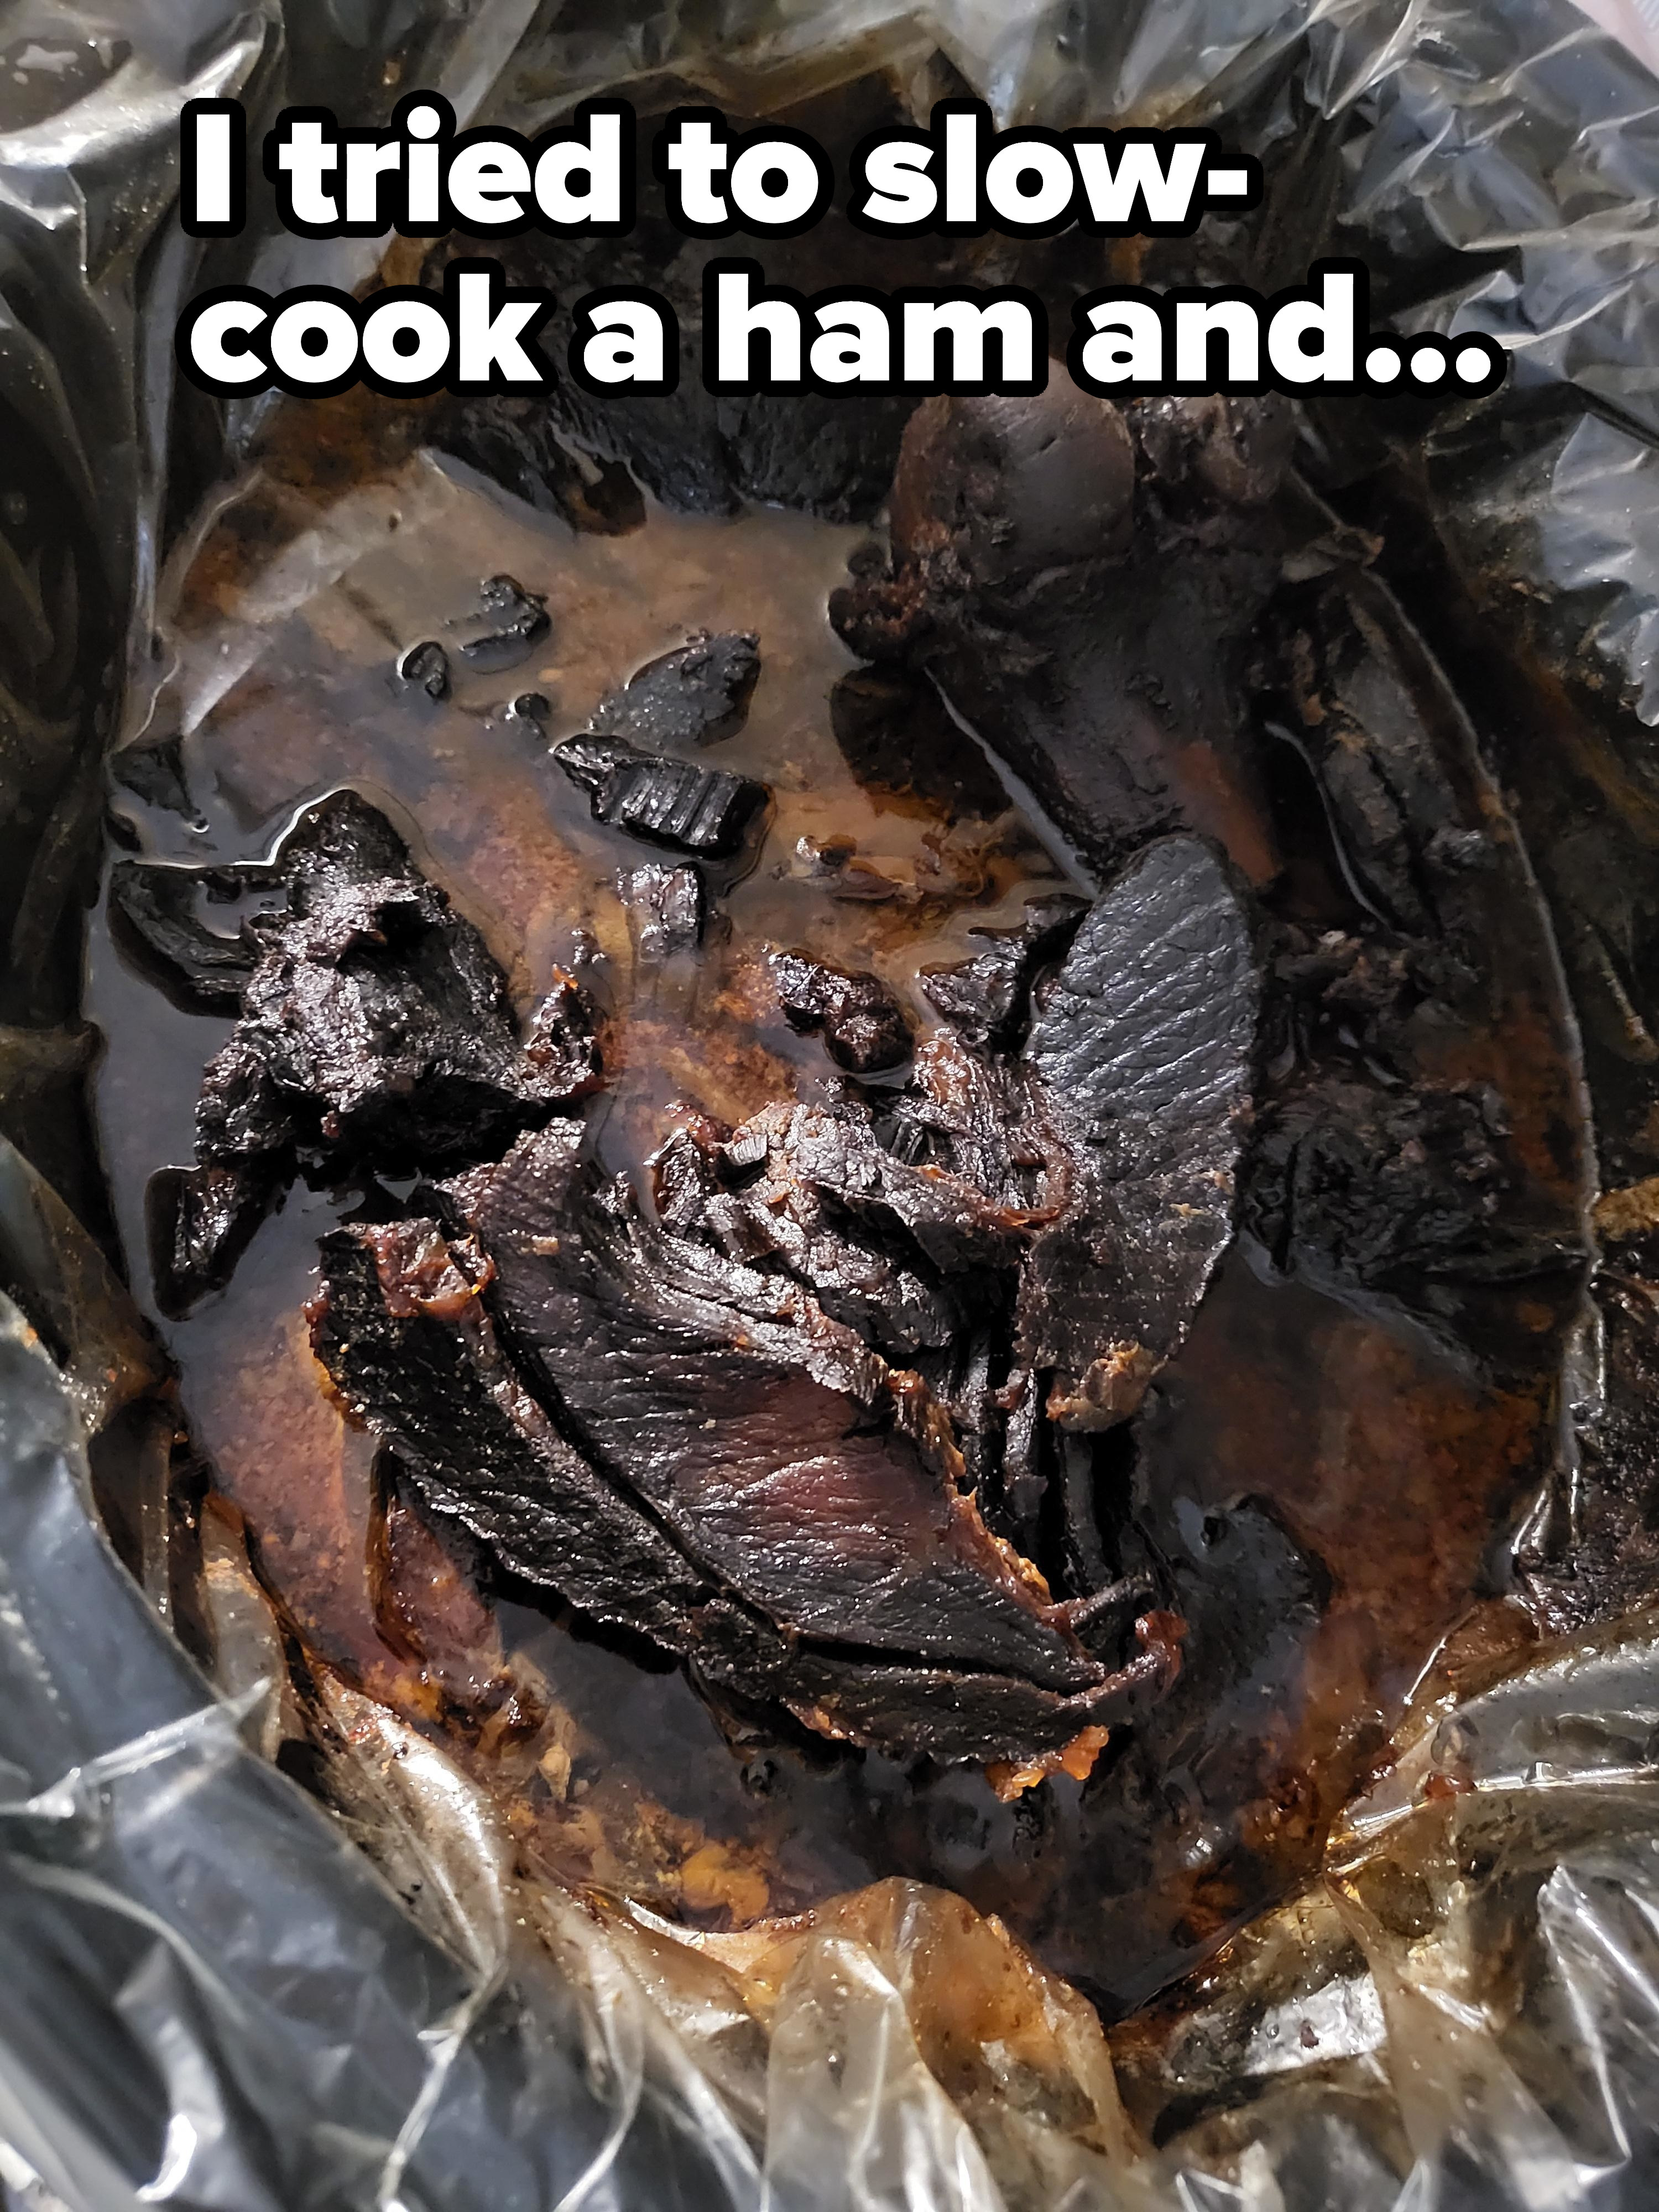 A burnt ham with the caption &quot;I tried to slow-cook a ham&quot;